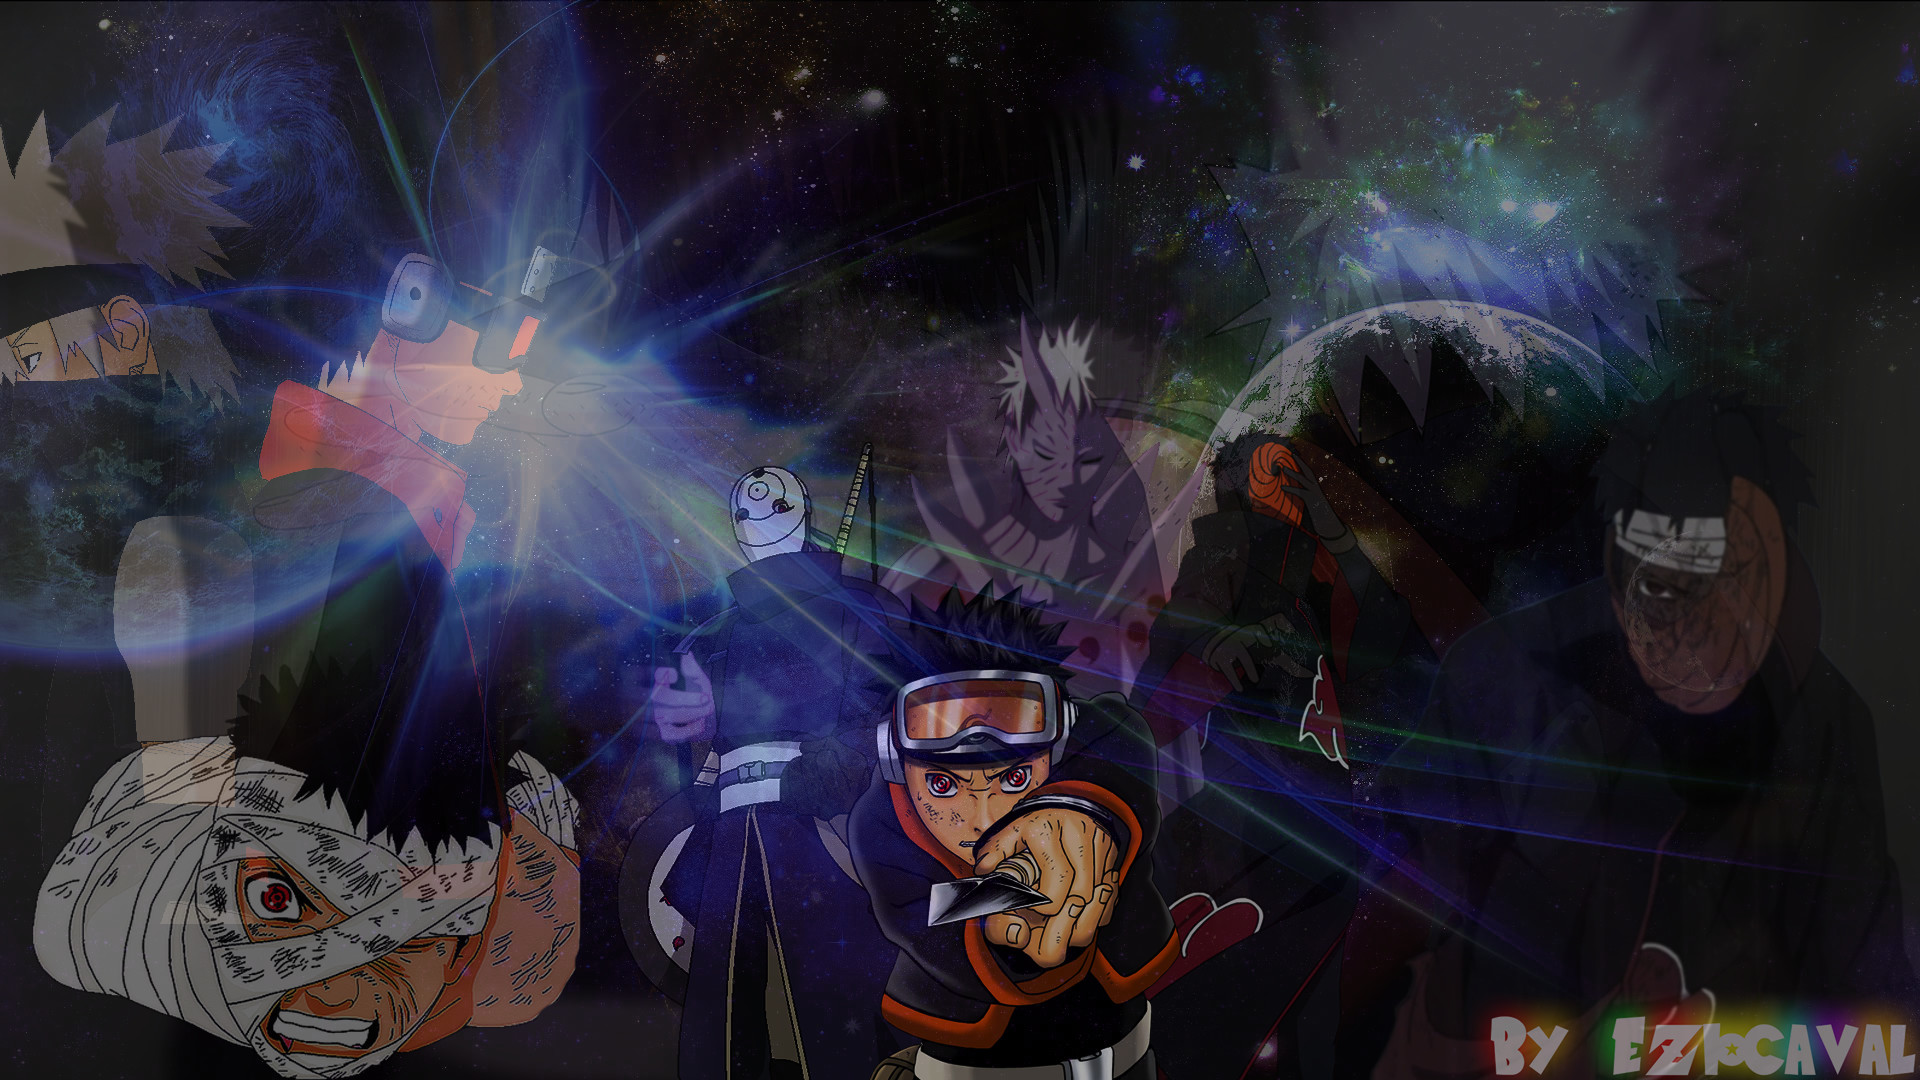 1920x1080 ... Obito Uchiha - The Man behind the Mask (Wallpaper) by eziocaval